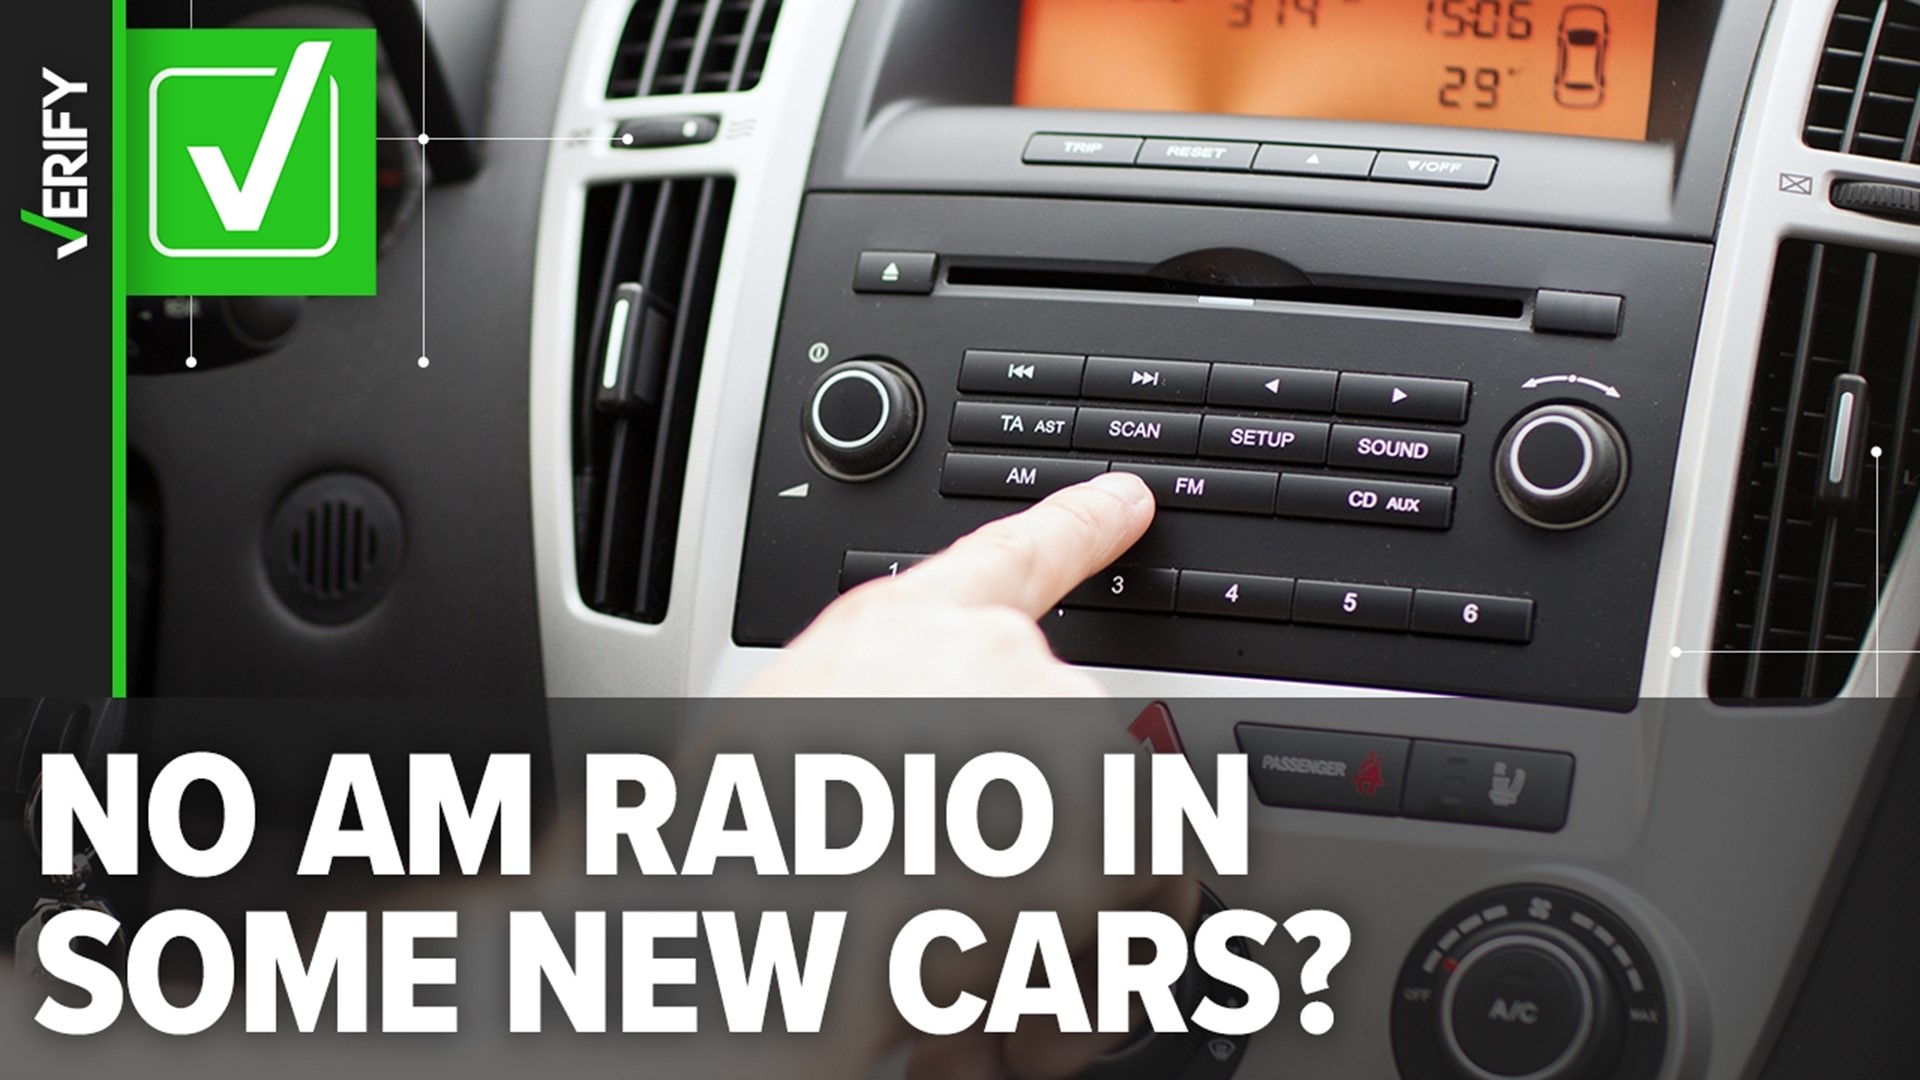 Yes, some car manufacturers are selling cars without AM radio